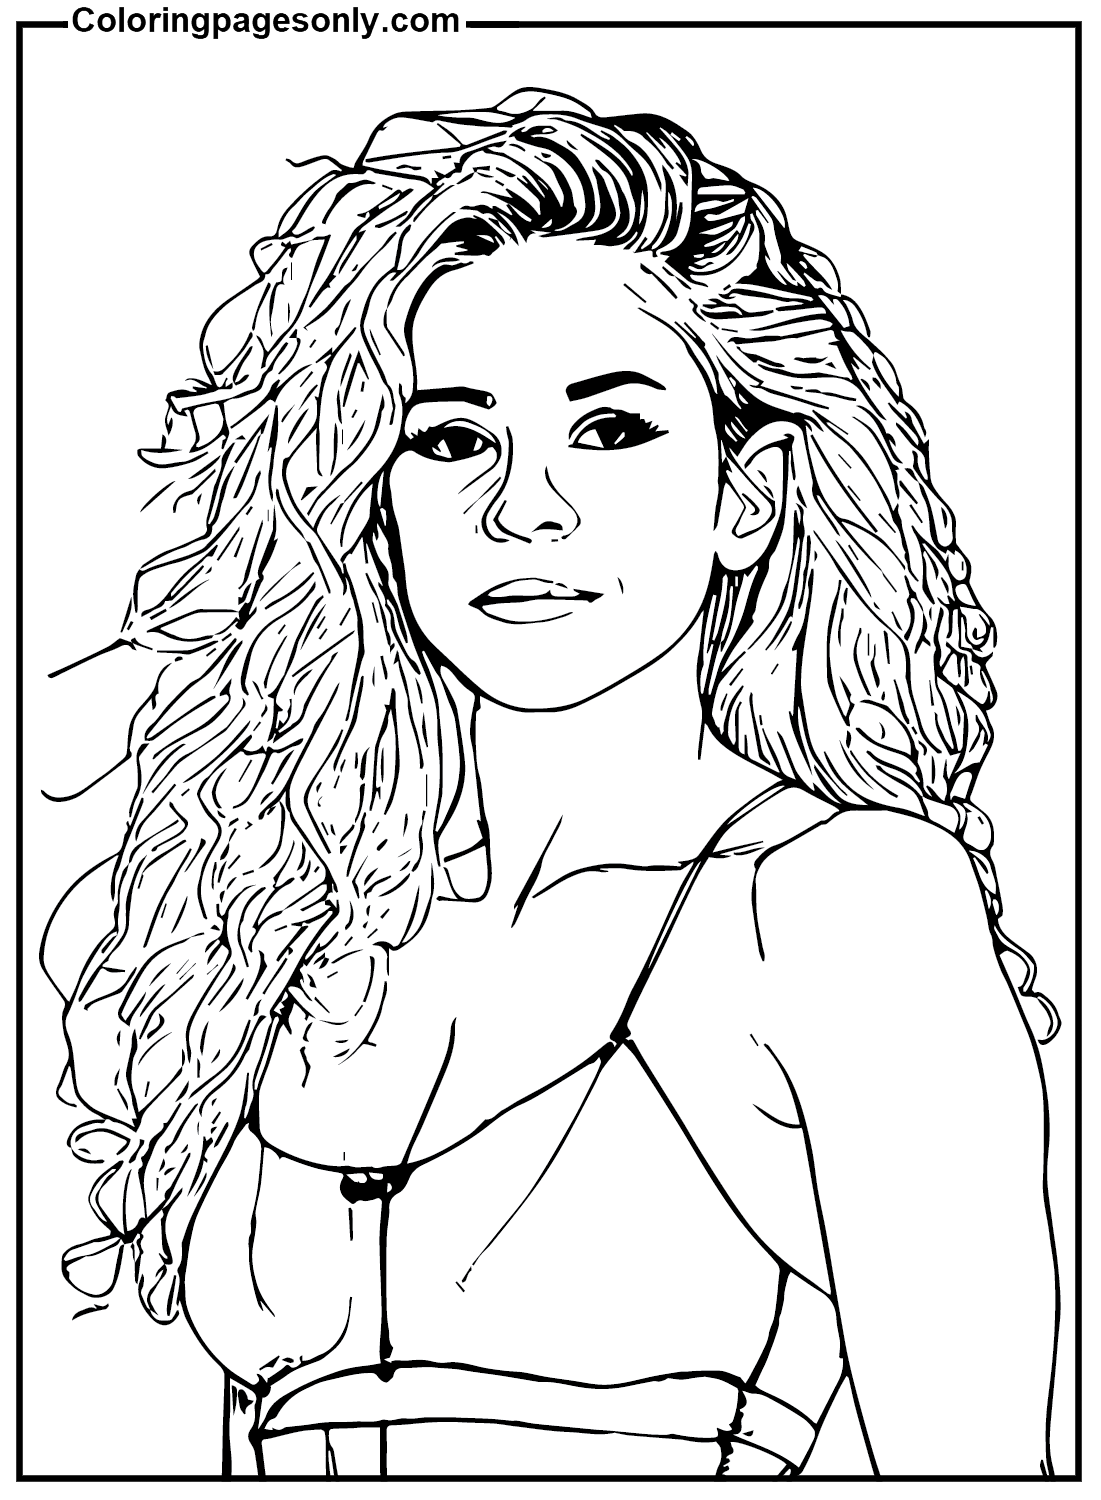 Shakira coloring pages